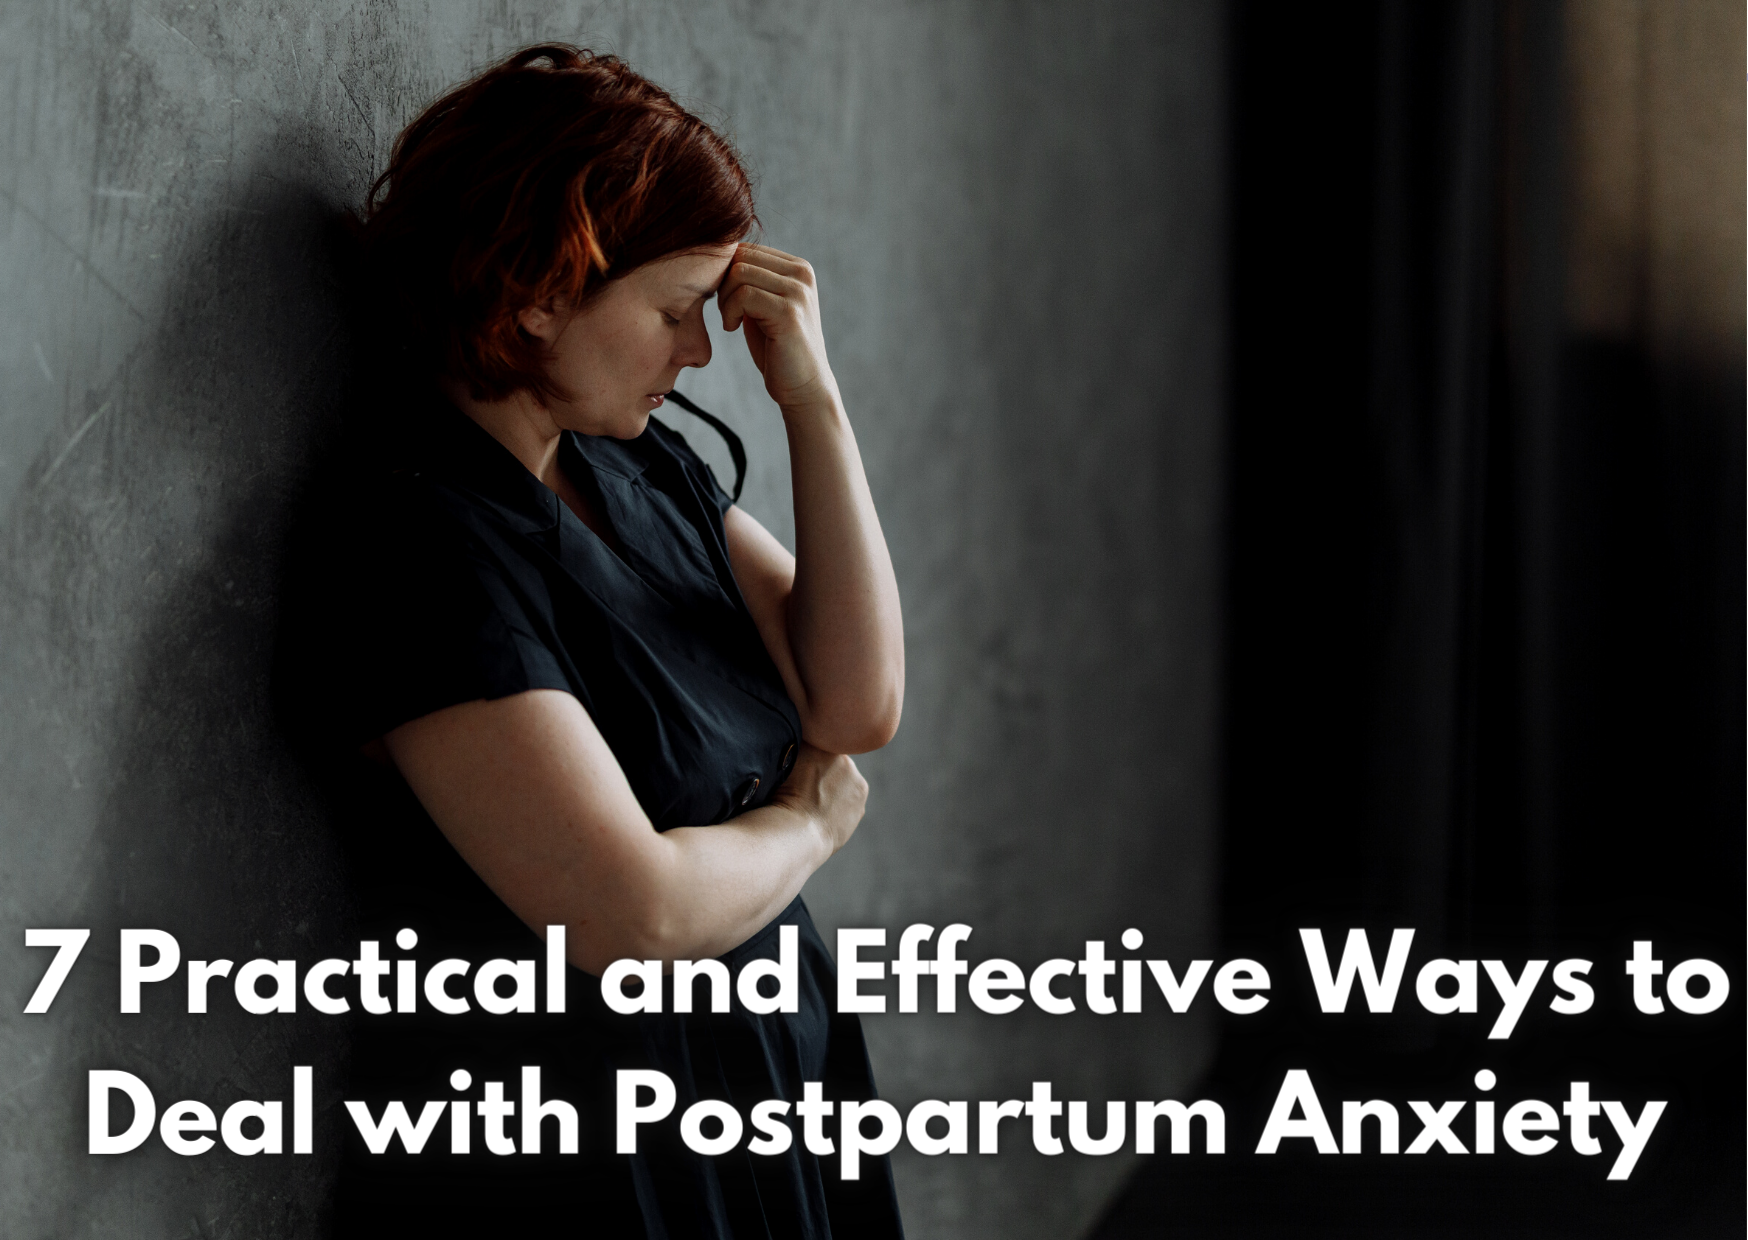 7 Practical and Effective Ways to Deal with Postpartum Anxiety